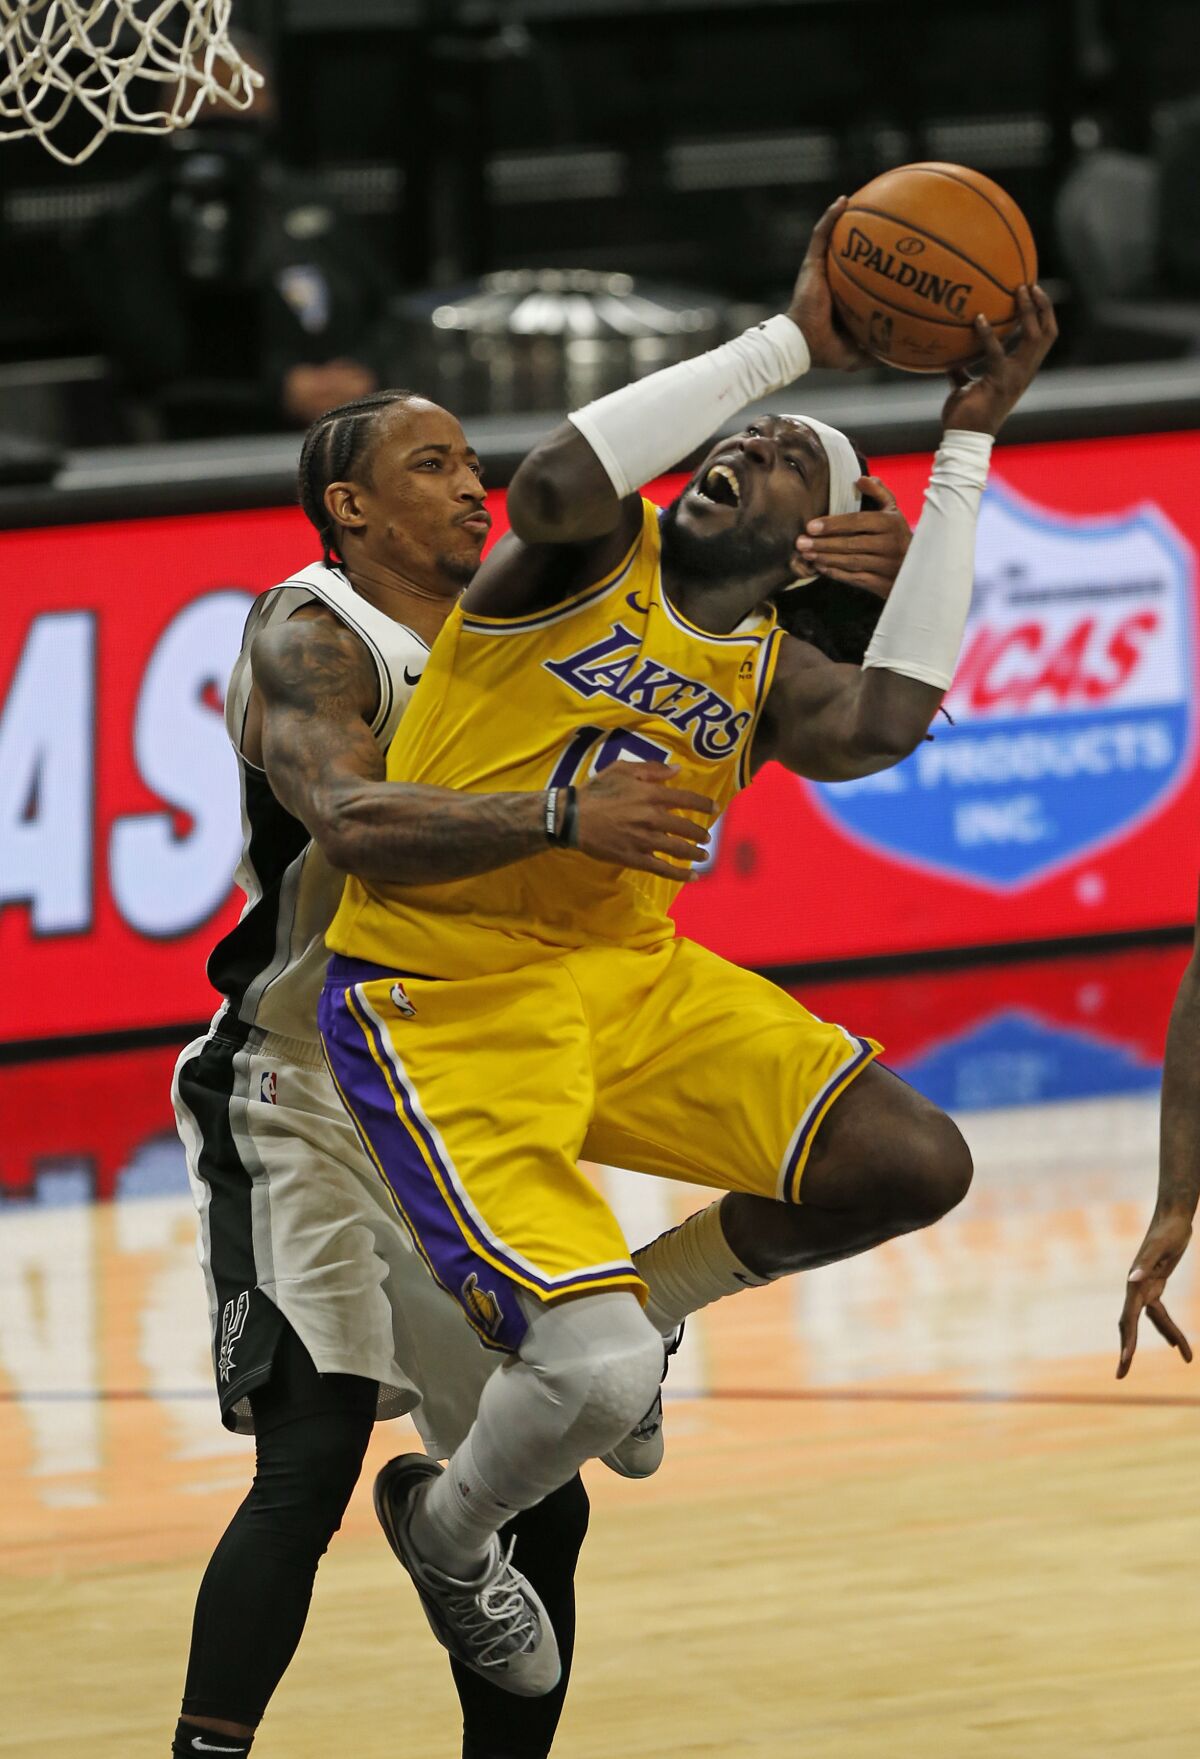 Lakers center Montrezl Harrell is fouled by Spurs guard DeMar DeRozan during their game Dec. 30, 2020, in San Antonio.